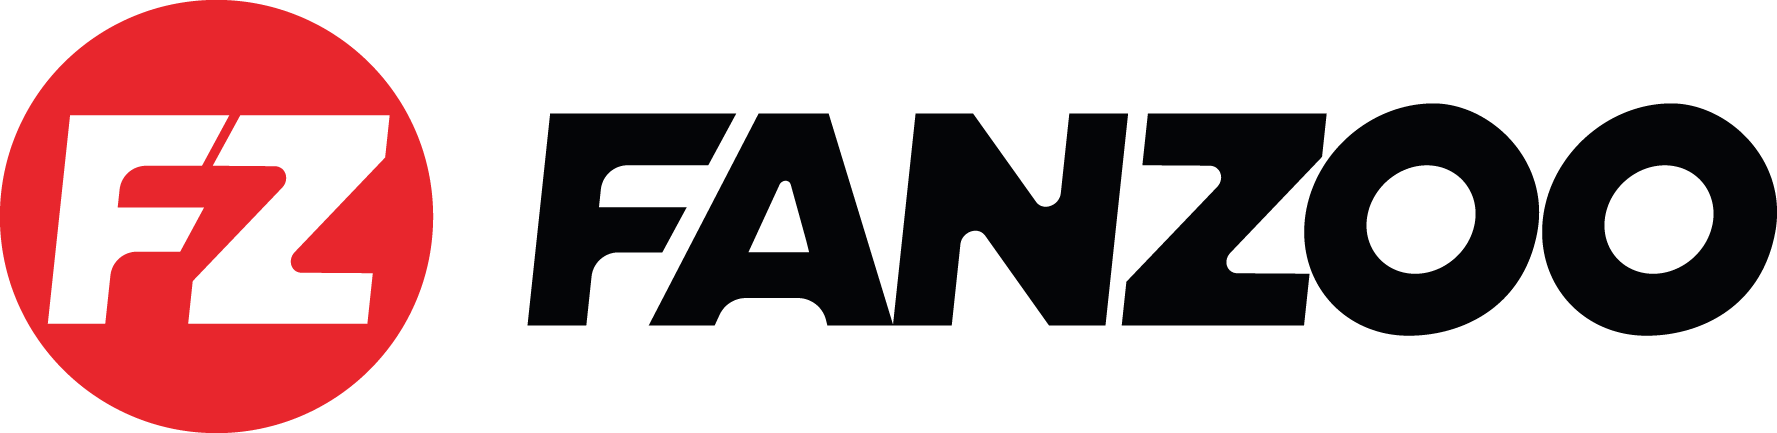 Fanzoo.com - Compare prices and deals across every major store.